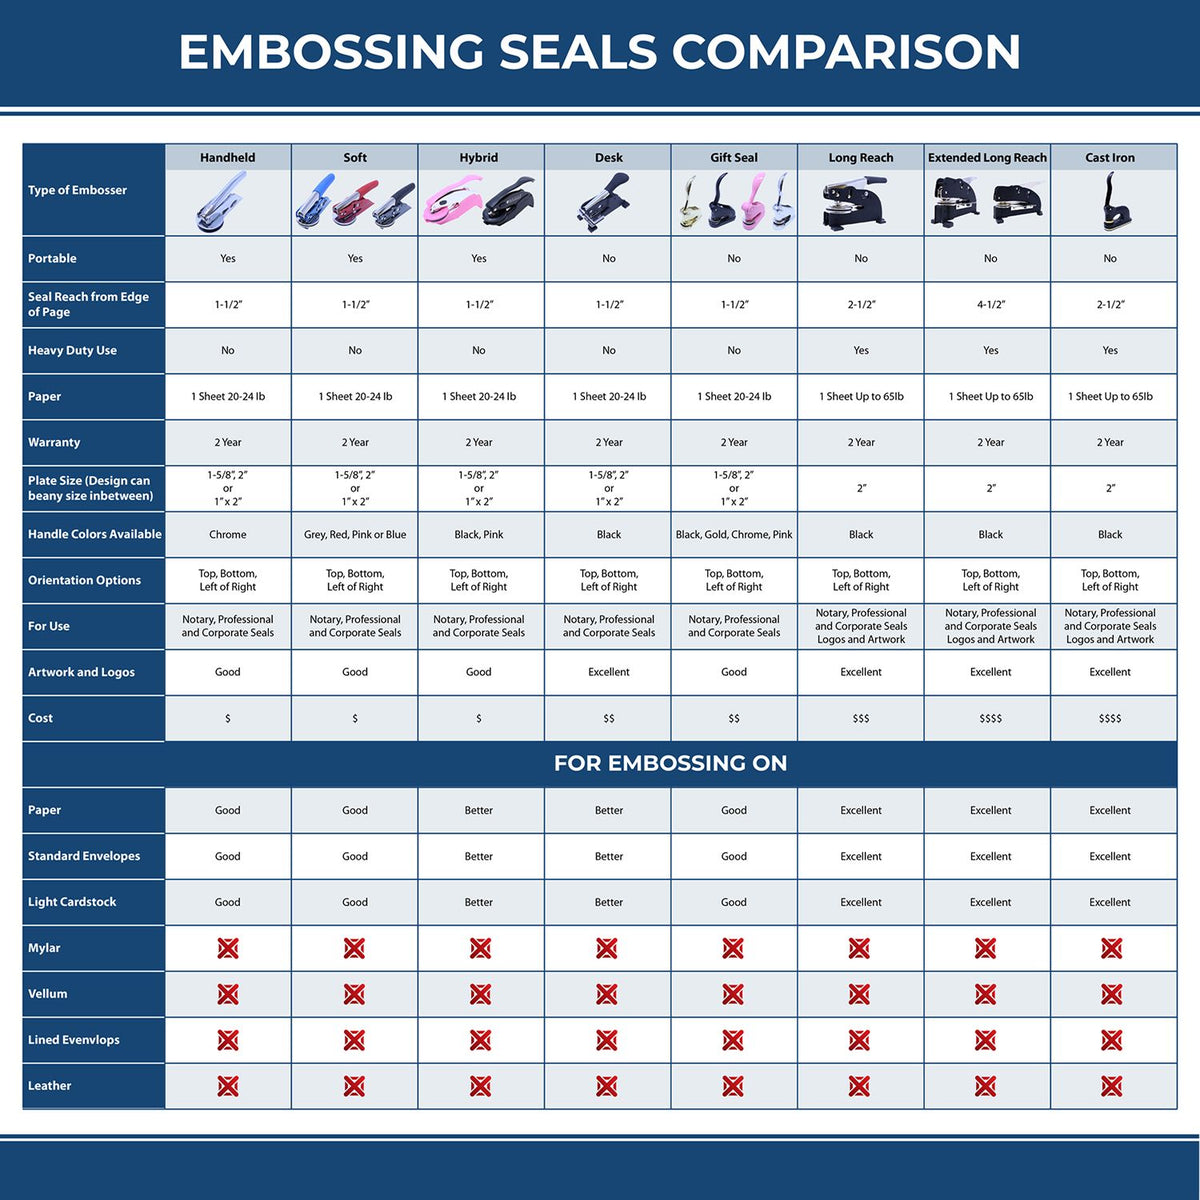 A comparison chart for the different types of mount models available for the Hybrid Utah Engineer Seal